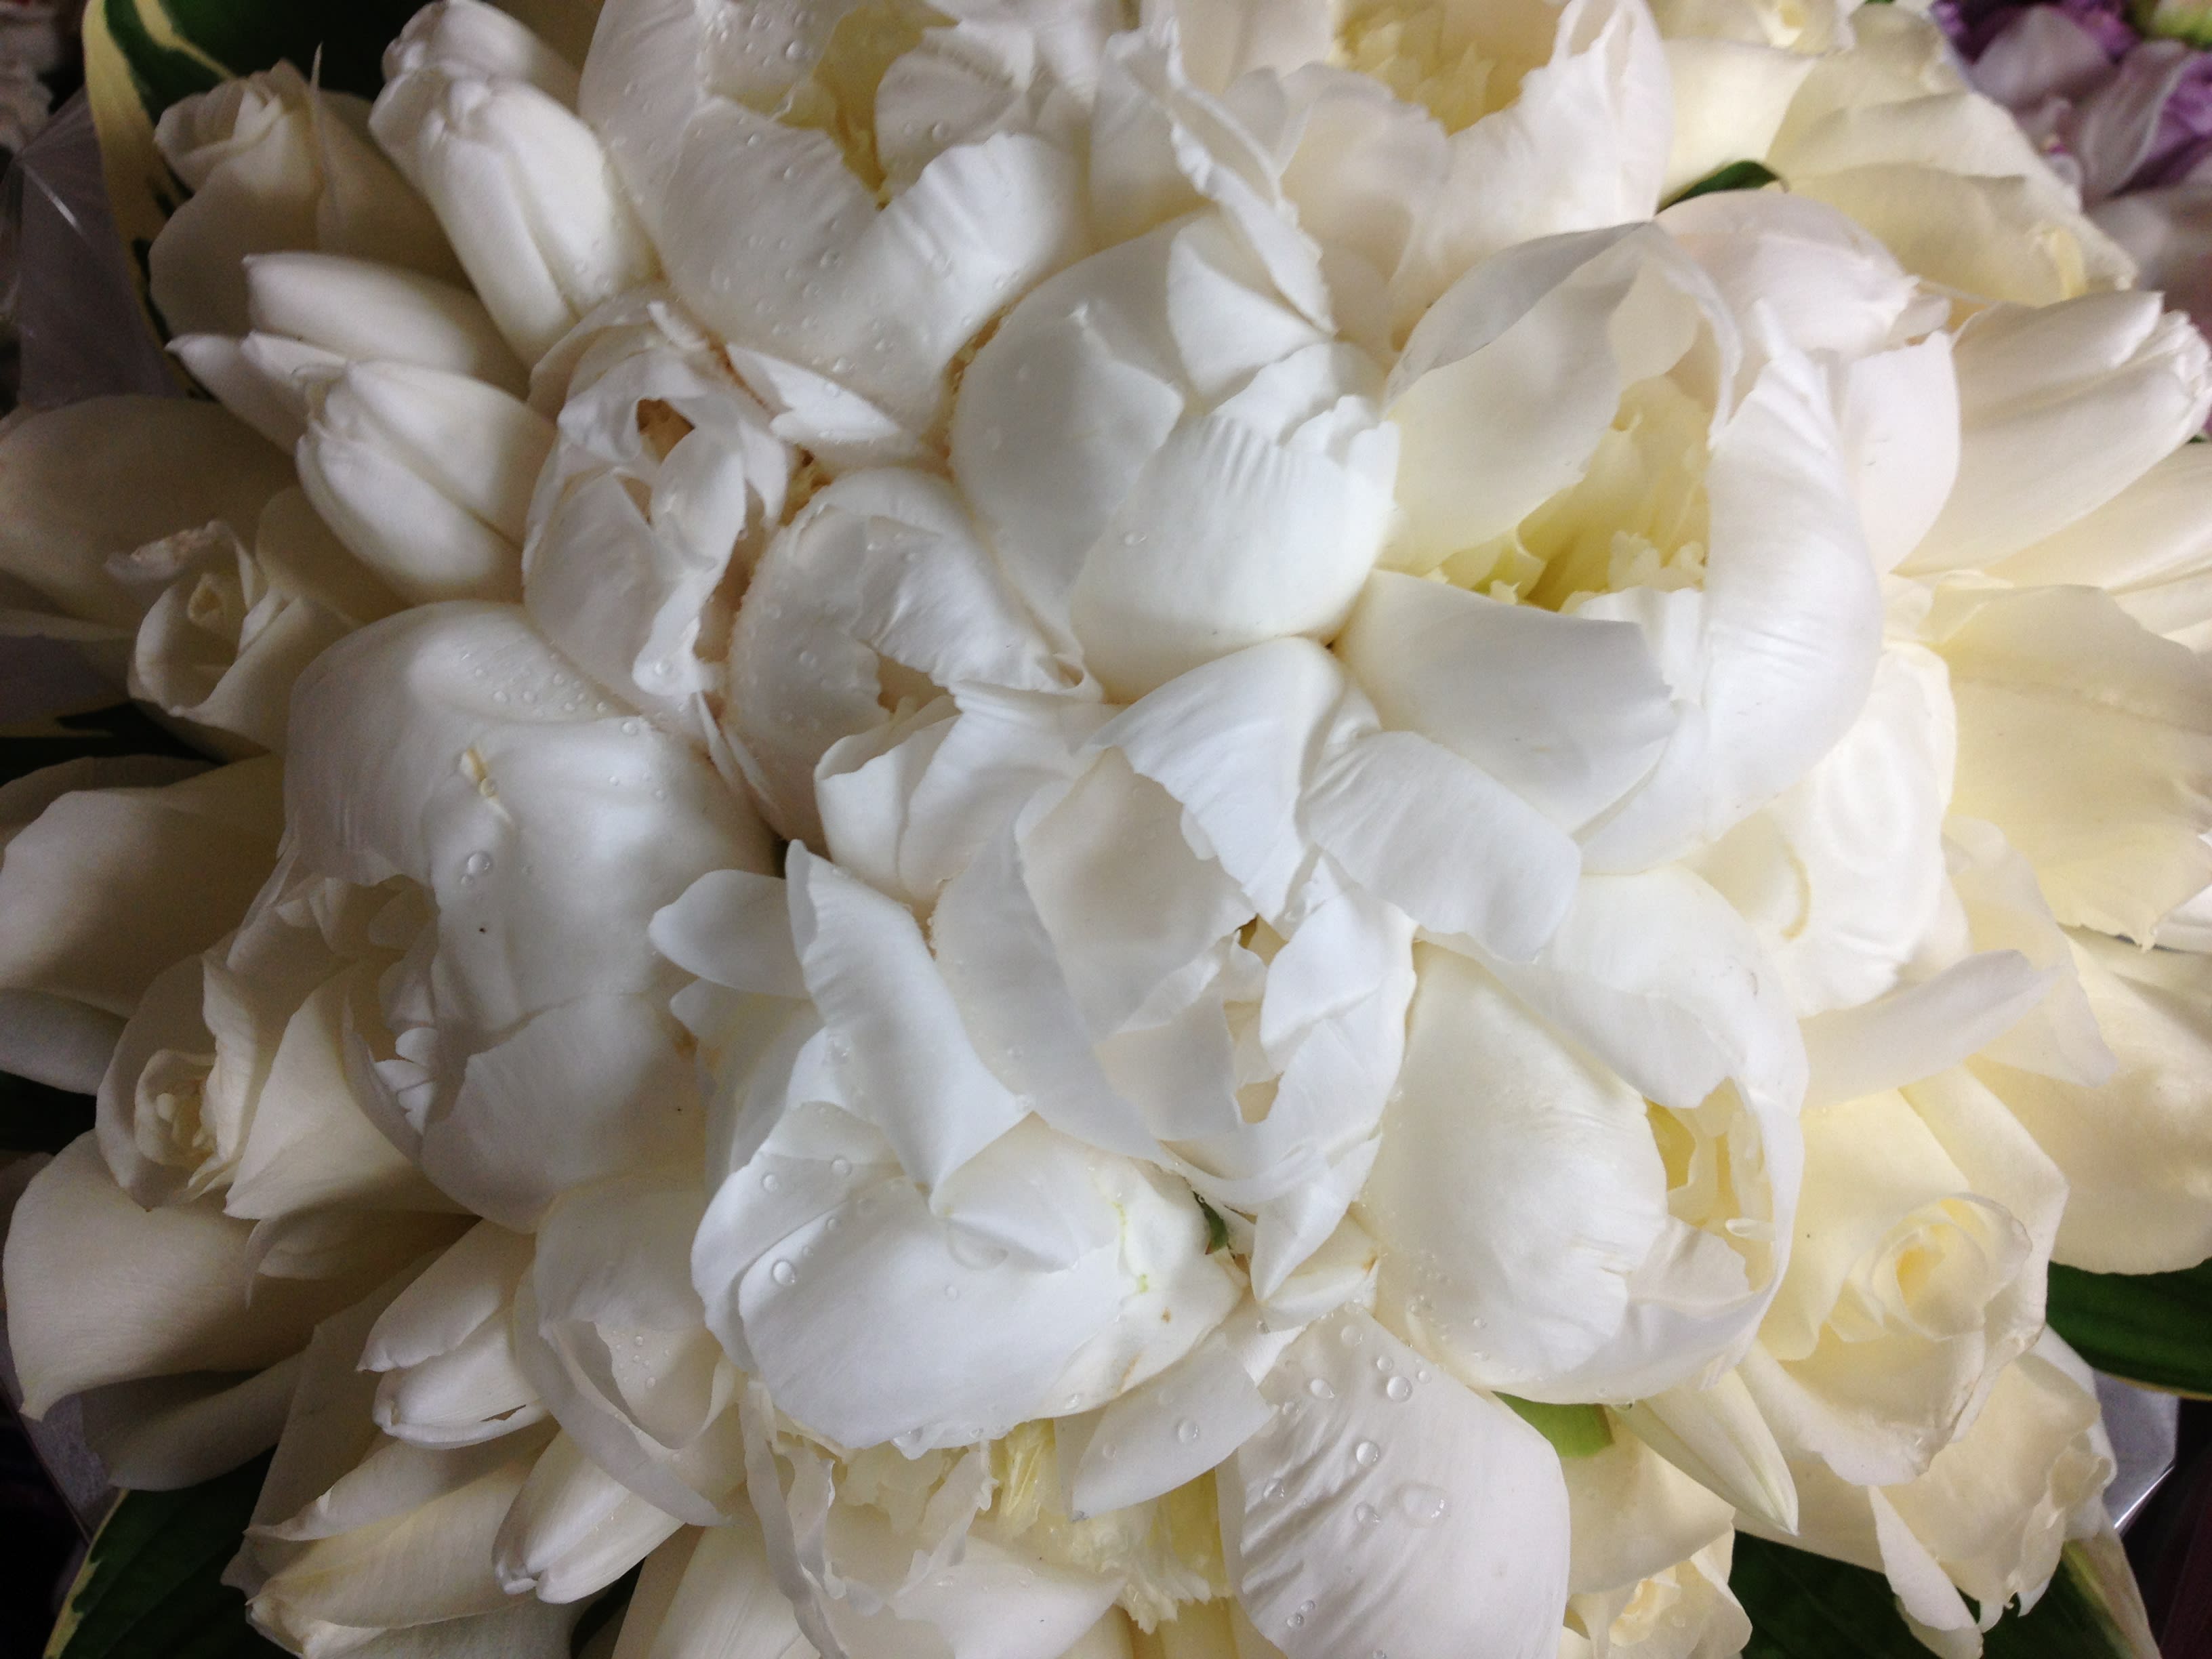 grand white hand tie bouquet peonies,roses,tulips - mixed white grand hand tie bouquet